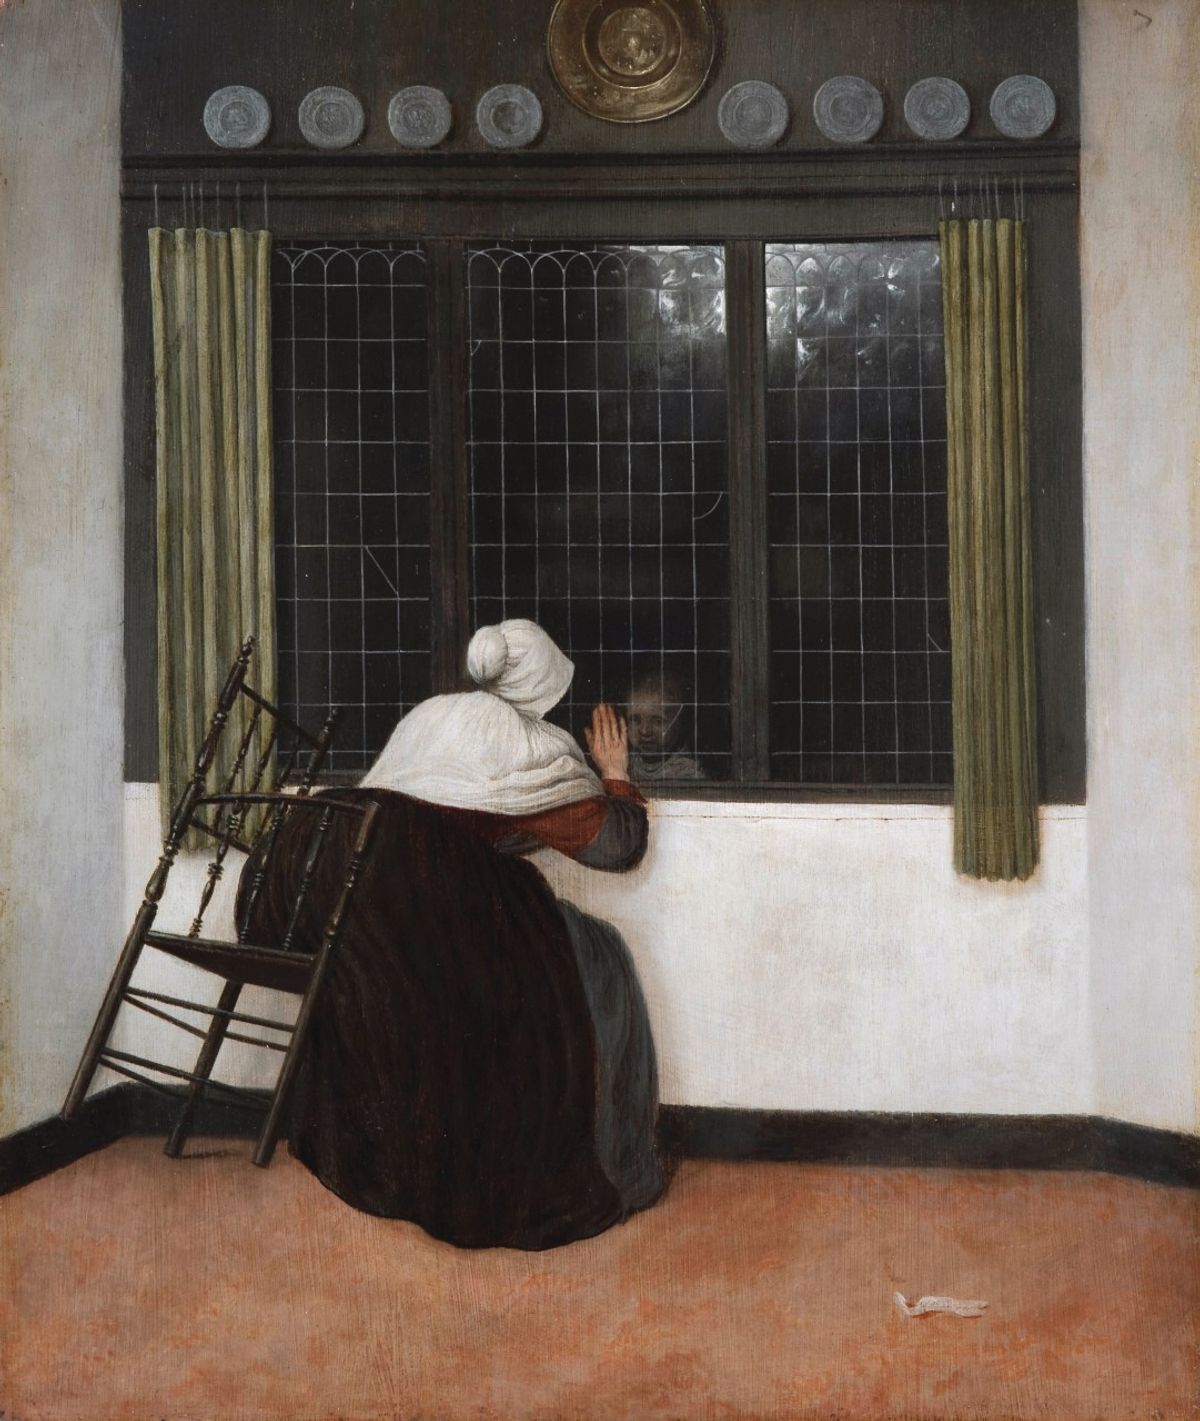 Vrel’s work focuses on enigmatic characters, as in Seated Woman looking at a Child through a Window (after 1656) Fondation Custodia